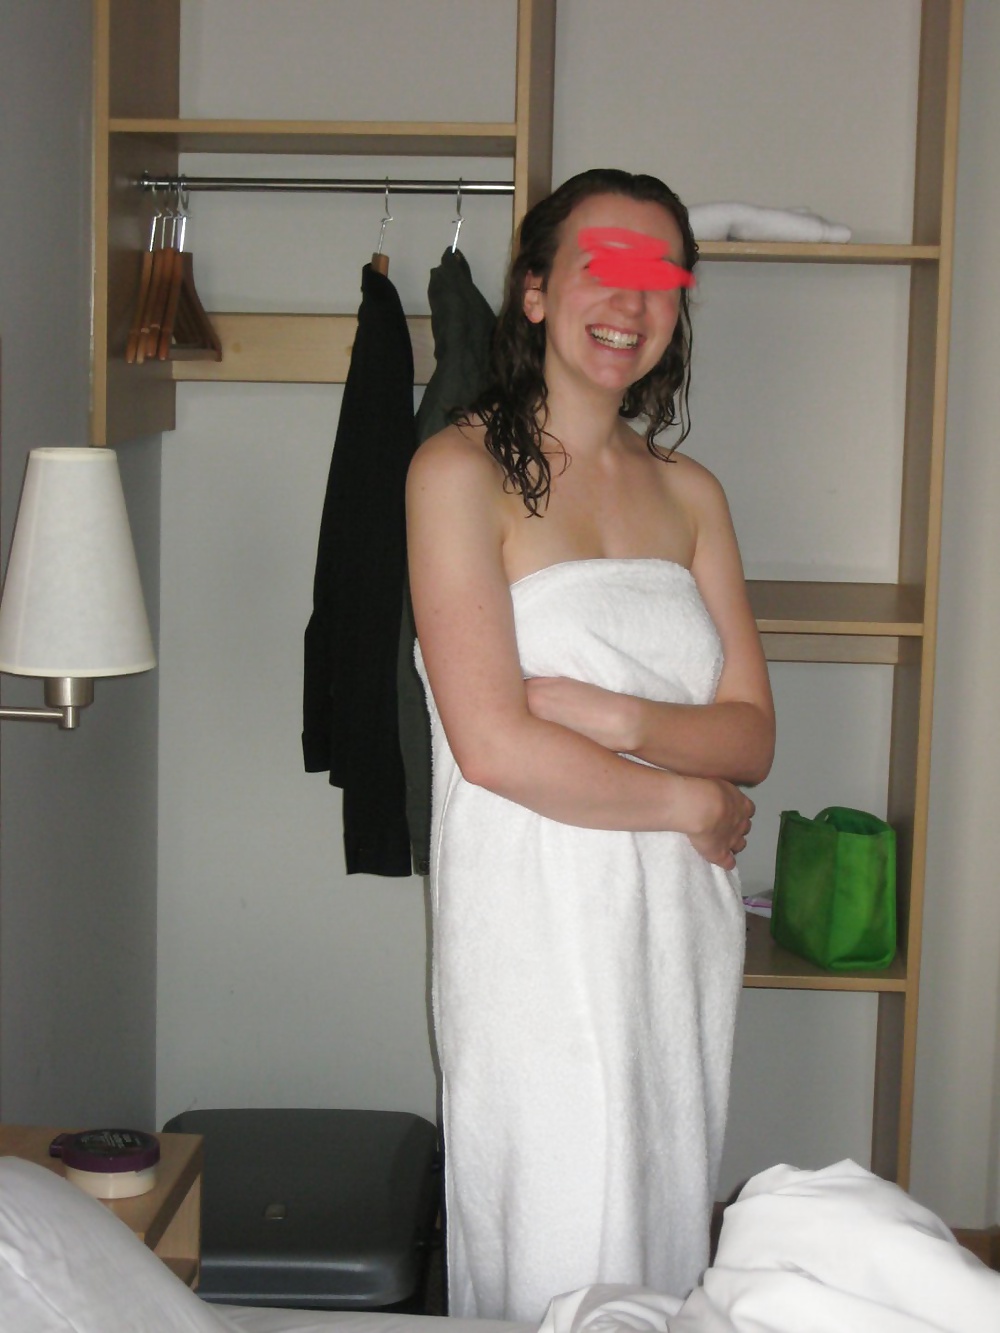 My Wife Caught Naked #31507533